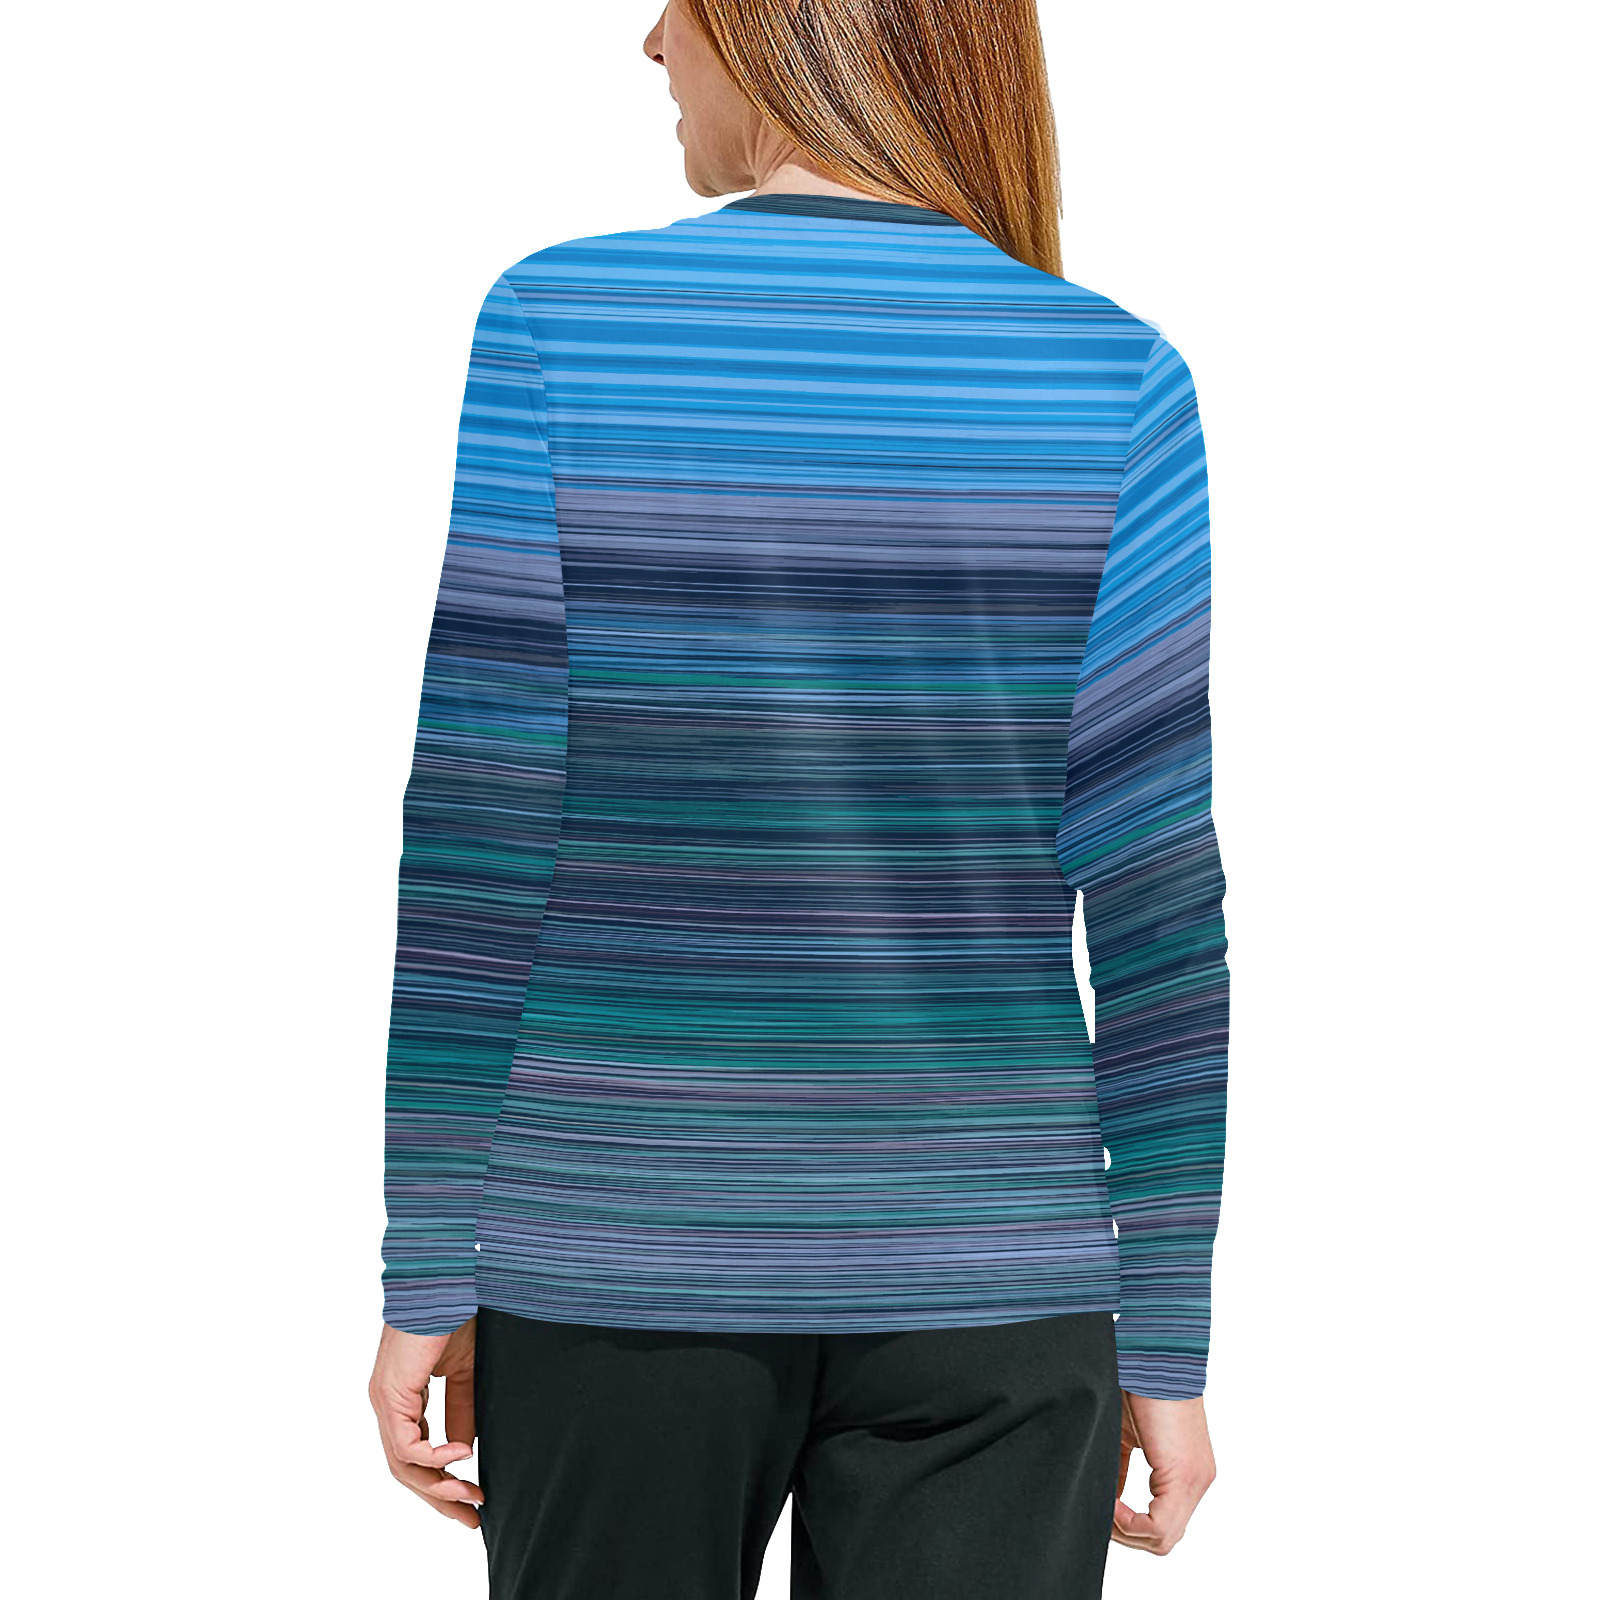 Abstract Blue Horizontal Stripes Women's All Over Print Pajama Top